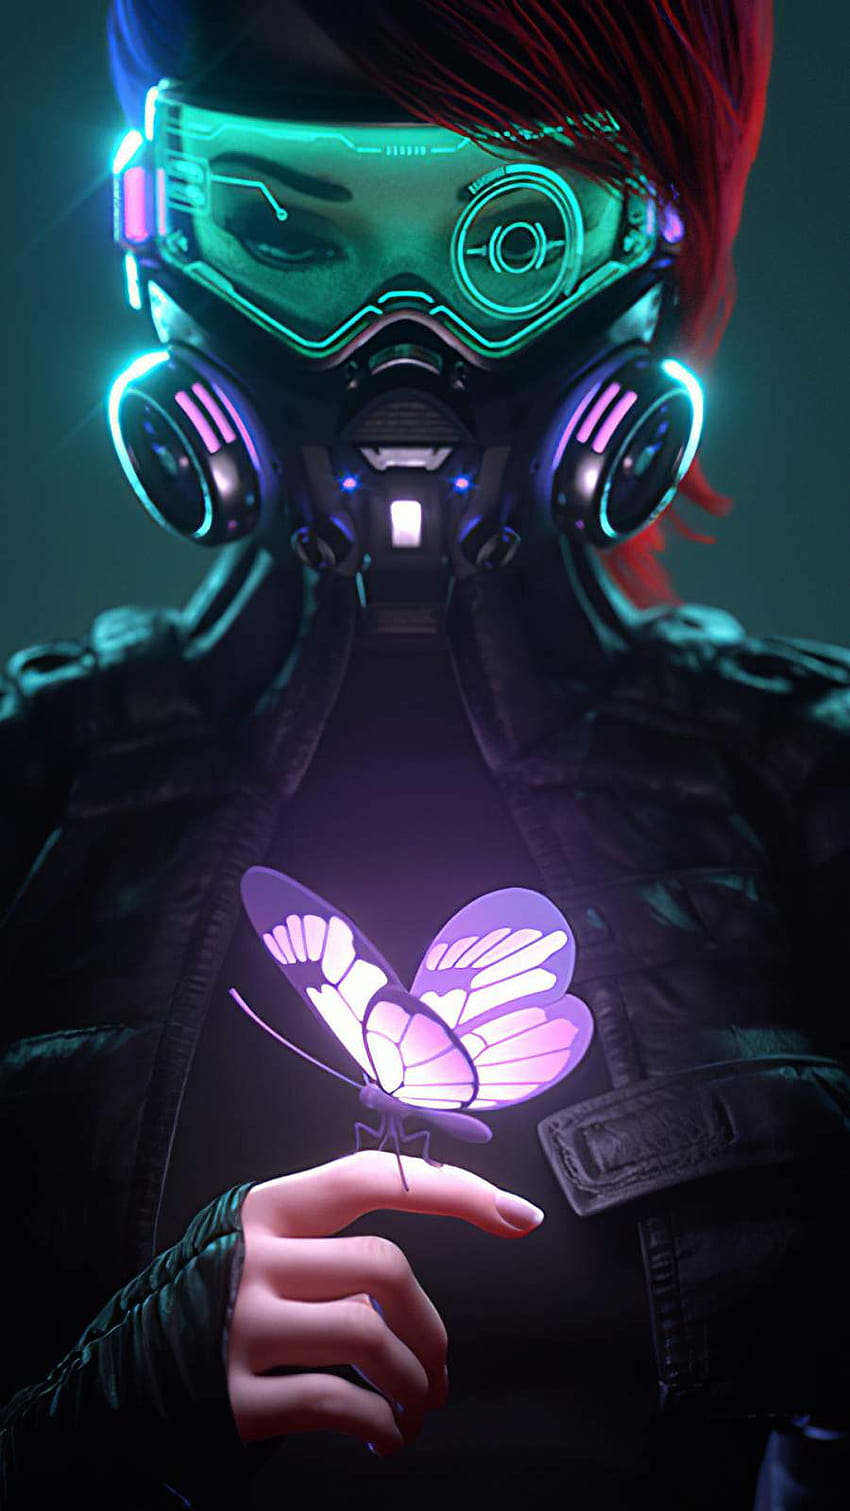 Cyberpunk Girl In A Gas Mask Looking At The Glowing Butterfly IPhone, iphone cyberpunk HD phone wallpaper